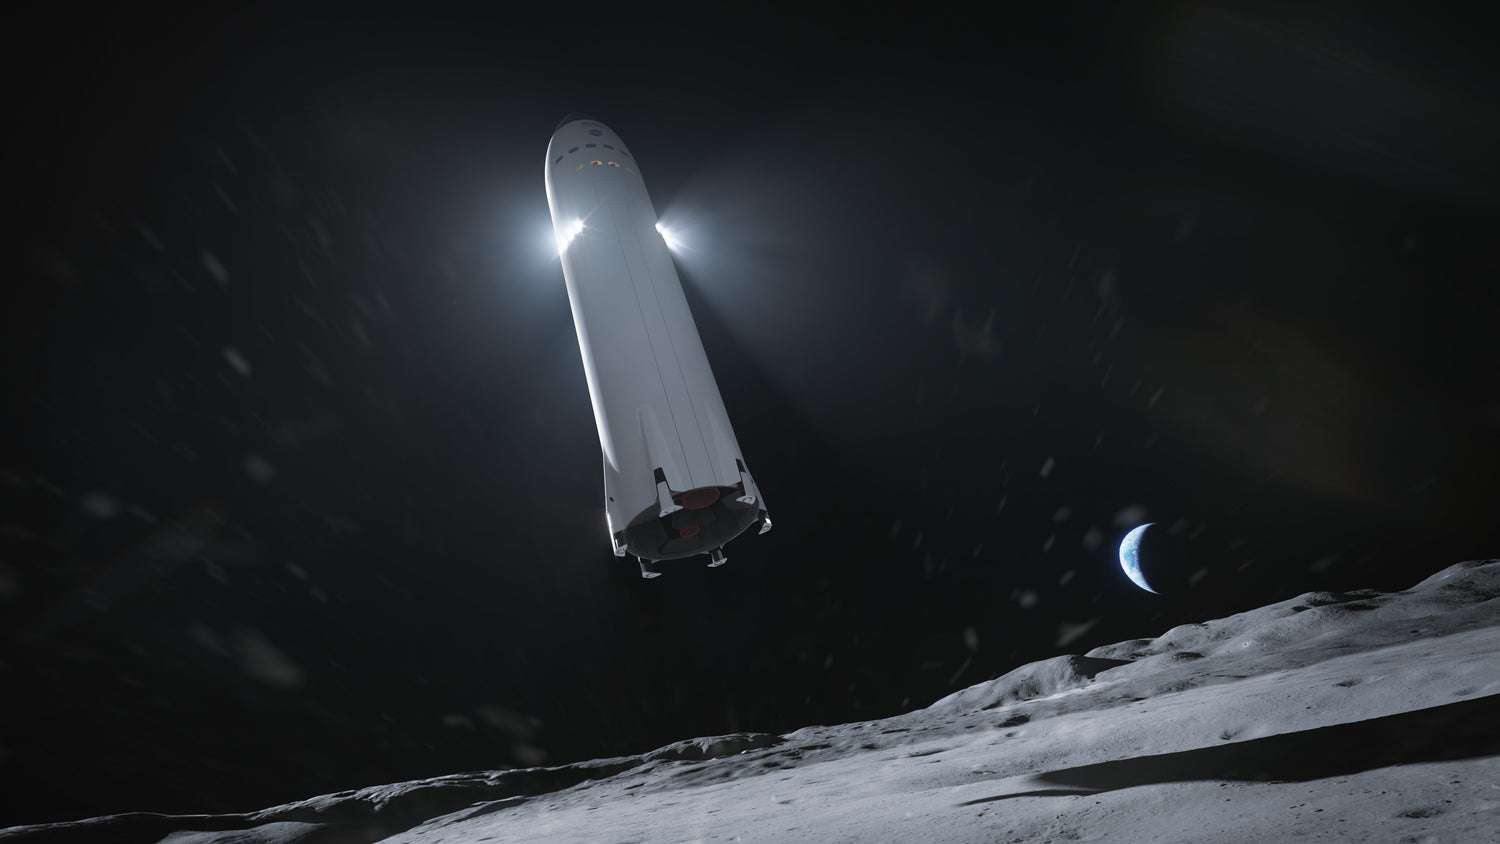 A Space Race begins as SpaceX competes to develop a Starship Lunar Lander for NASA